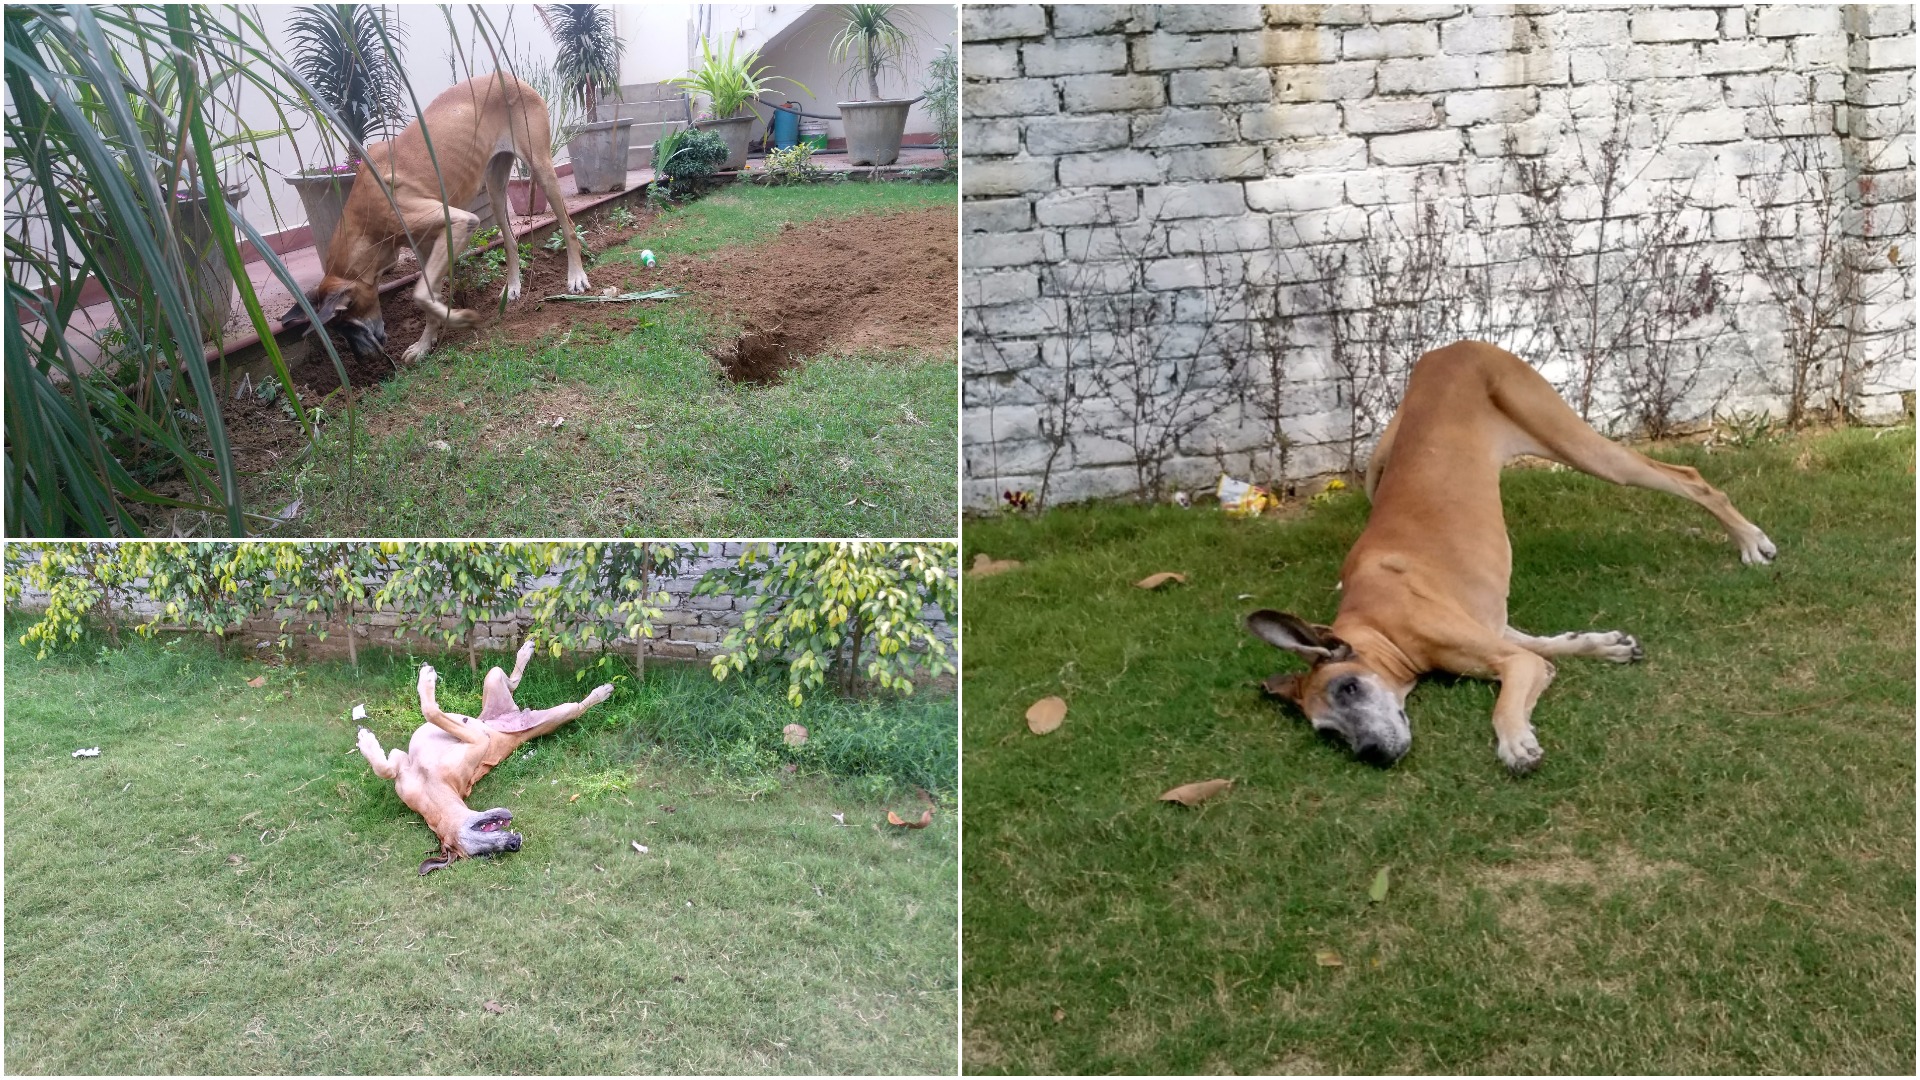  Heidi discovering the joys of country living in ludhiana 